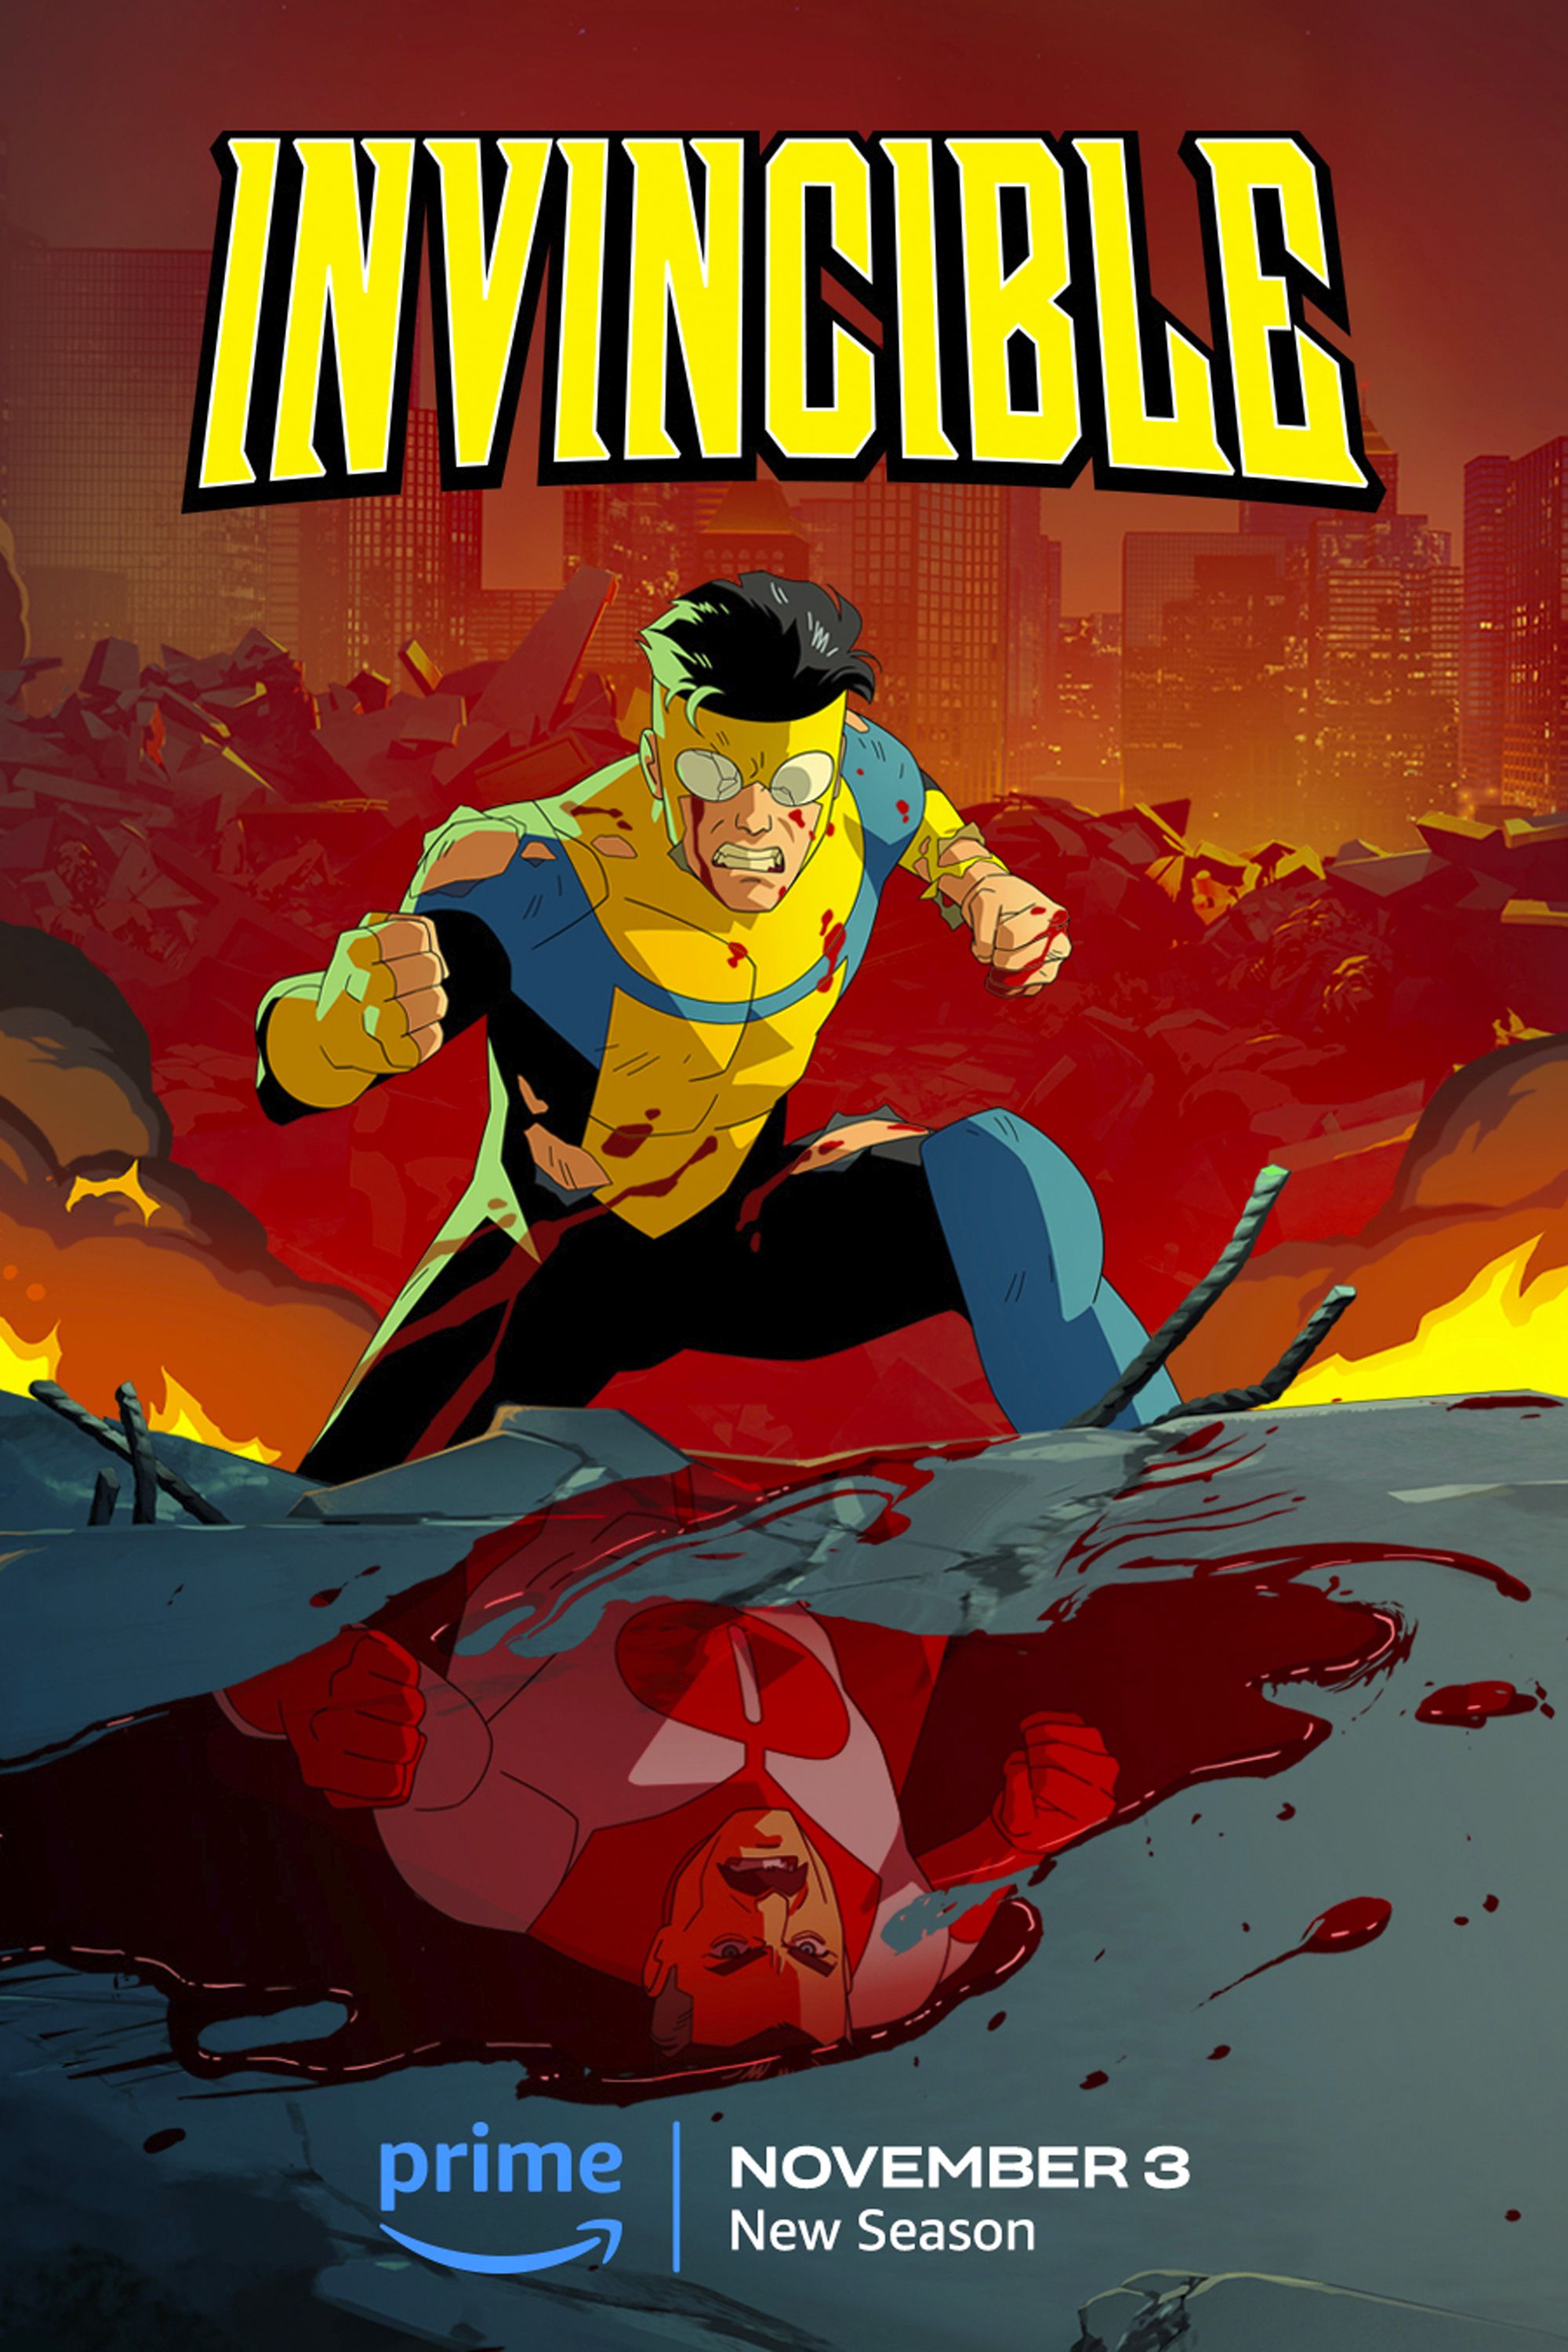 Invincible Season 3: Cast, Story, & Everything We Know